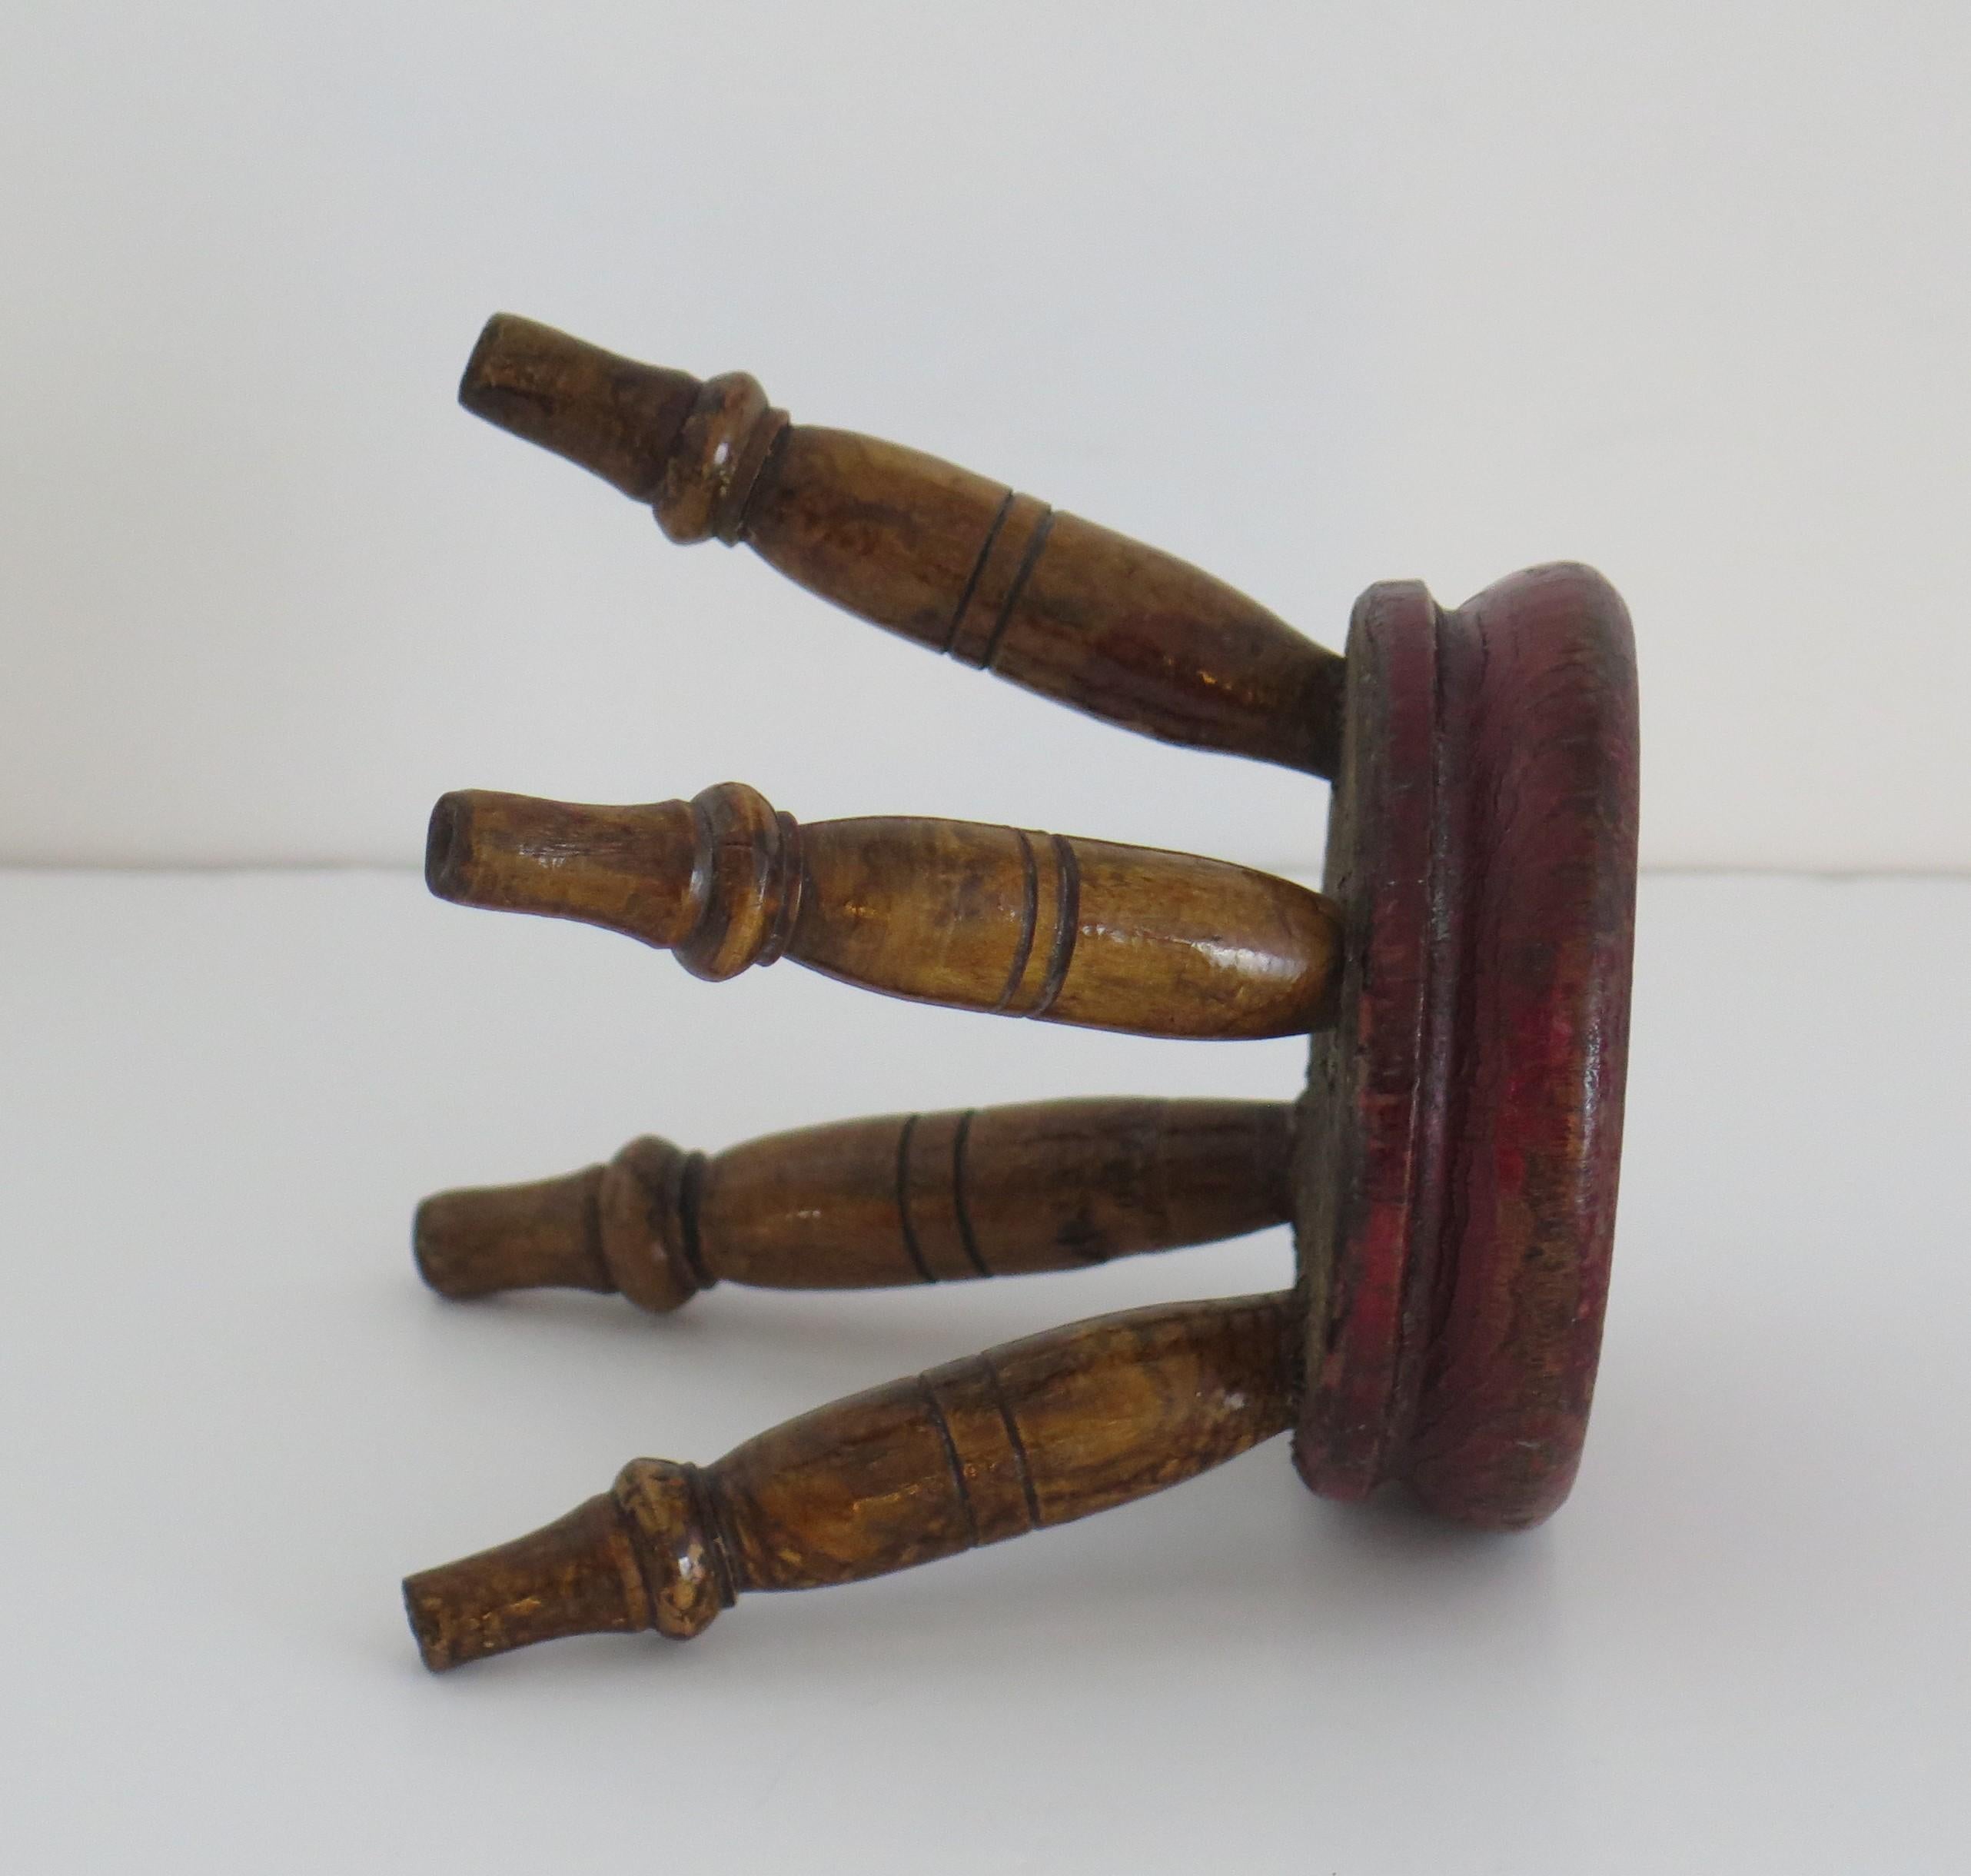 Rare small Candle Stand or Miniature Stool Hand Turned Wood, English circa 1850 For Sale 3